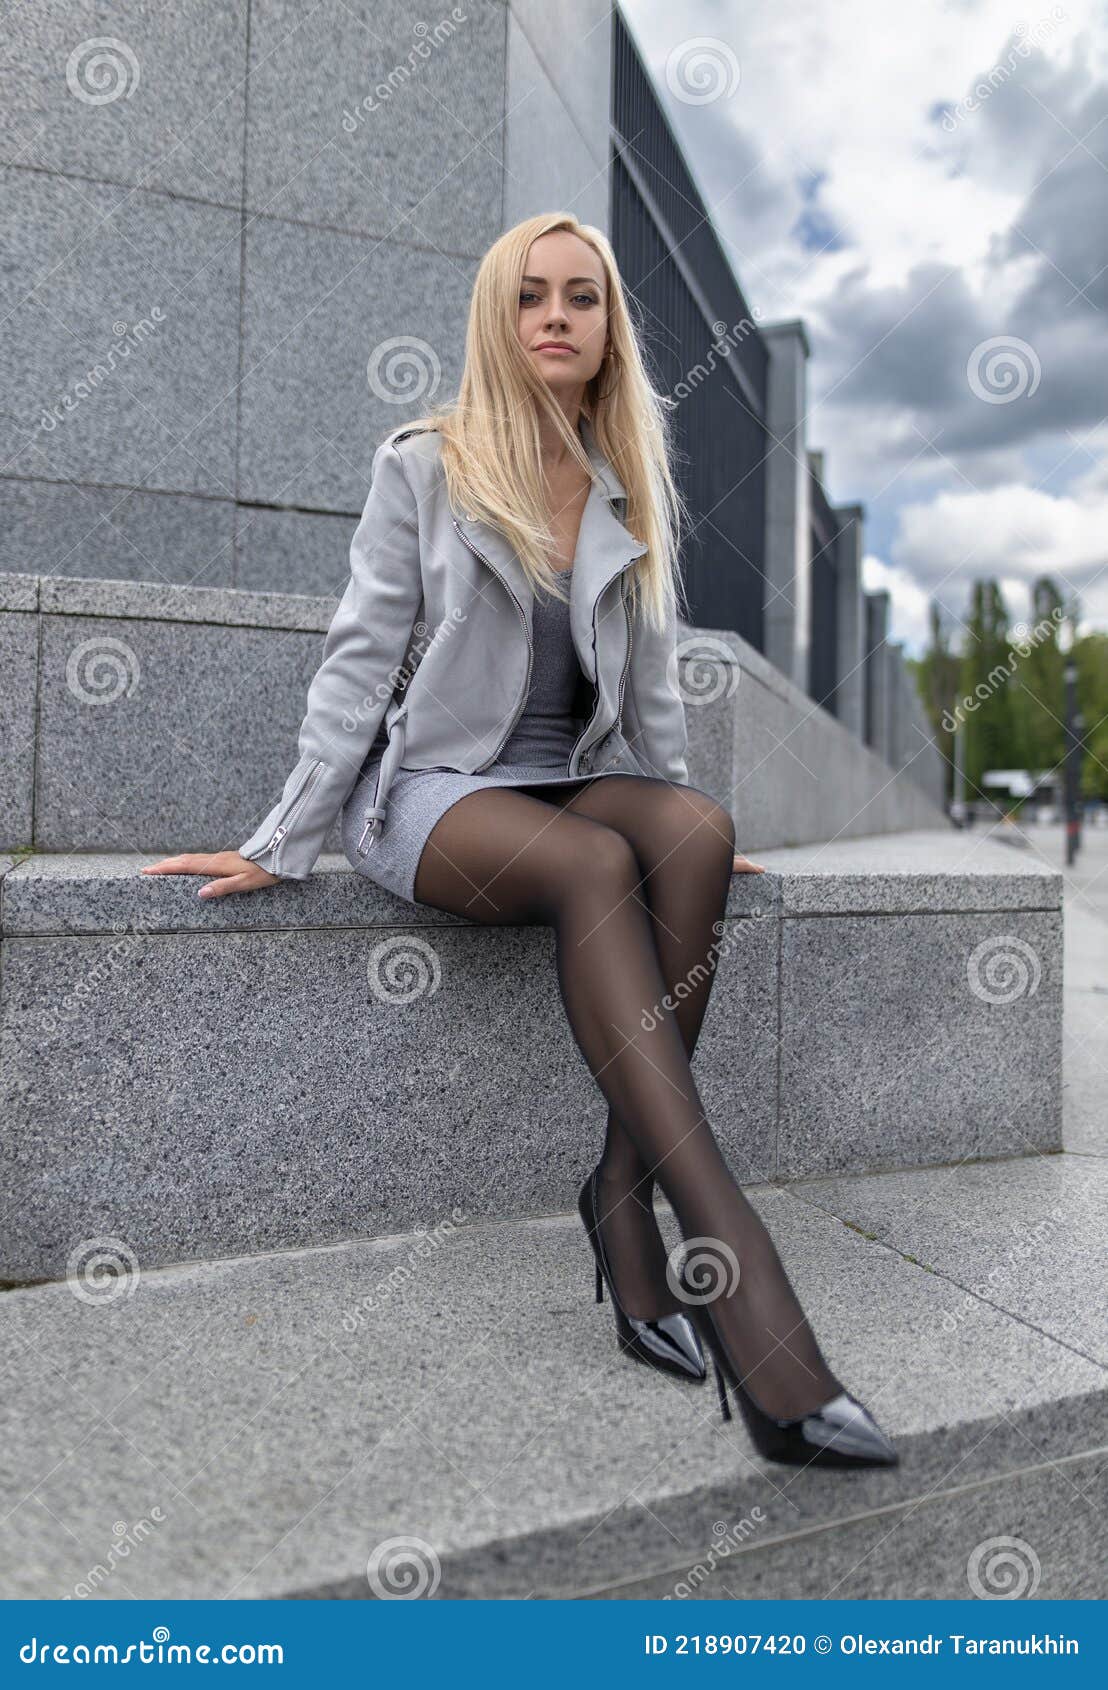 alexius ugap recommends Tights And High Heels